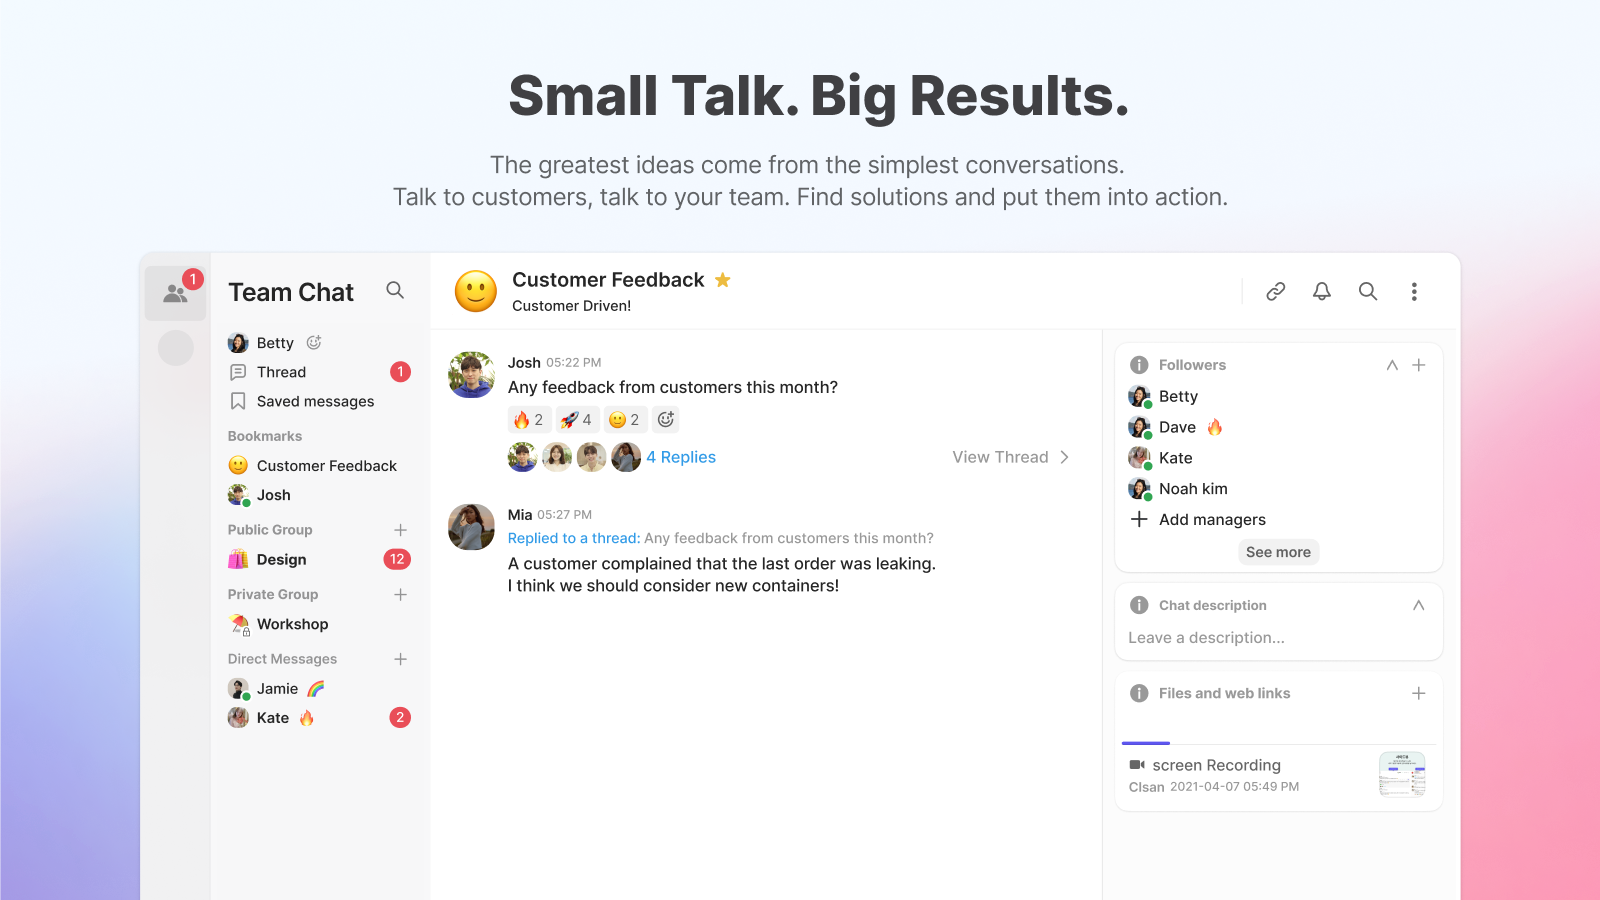 Small Talk. Big Results. - find solutions and put them to action